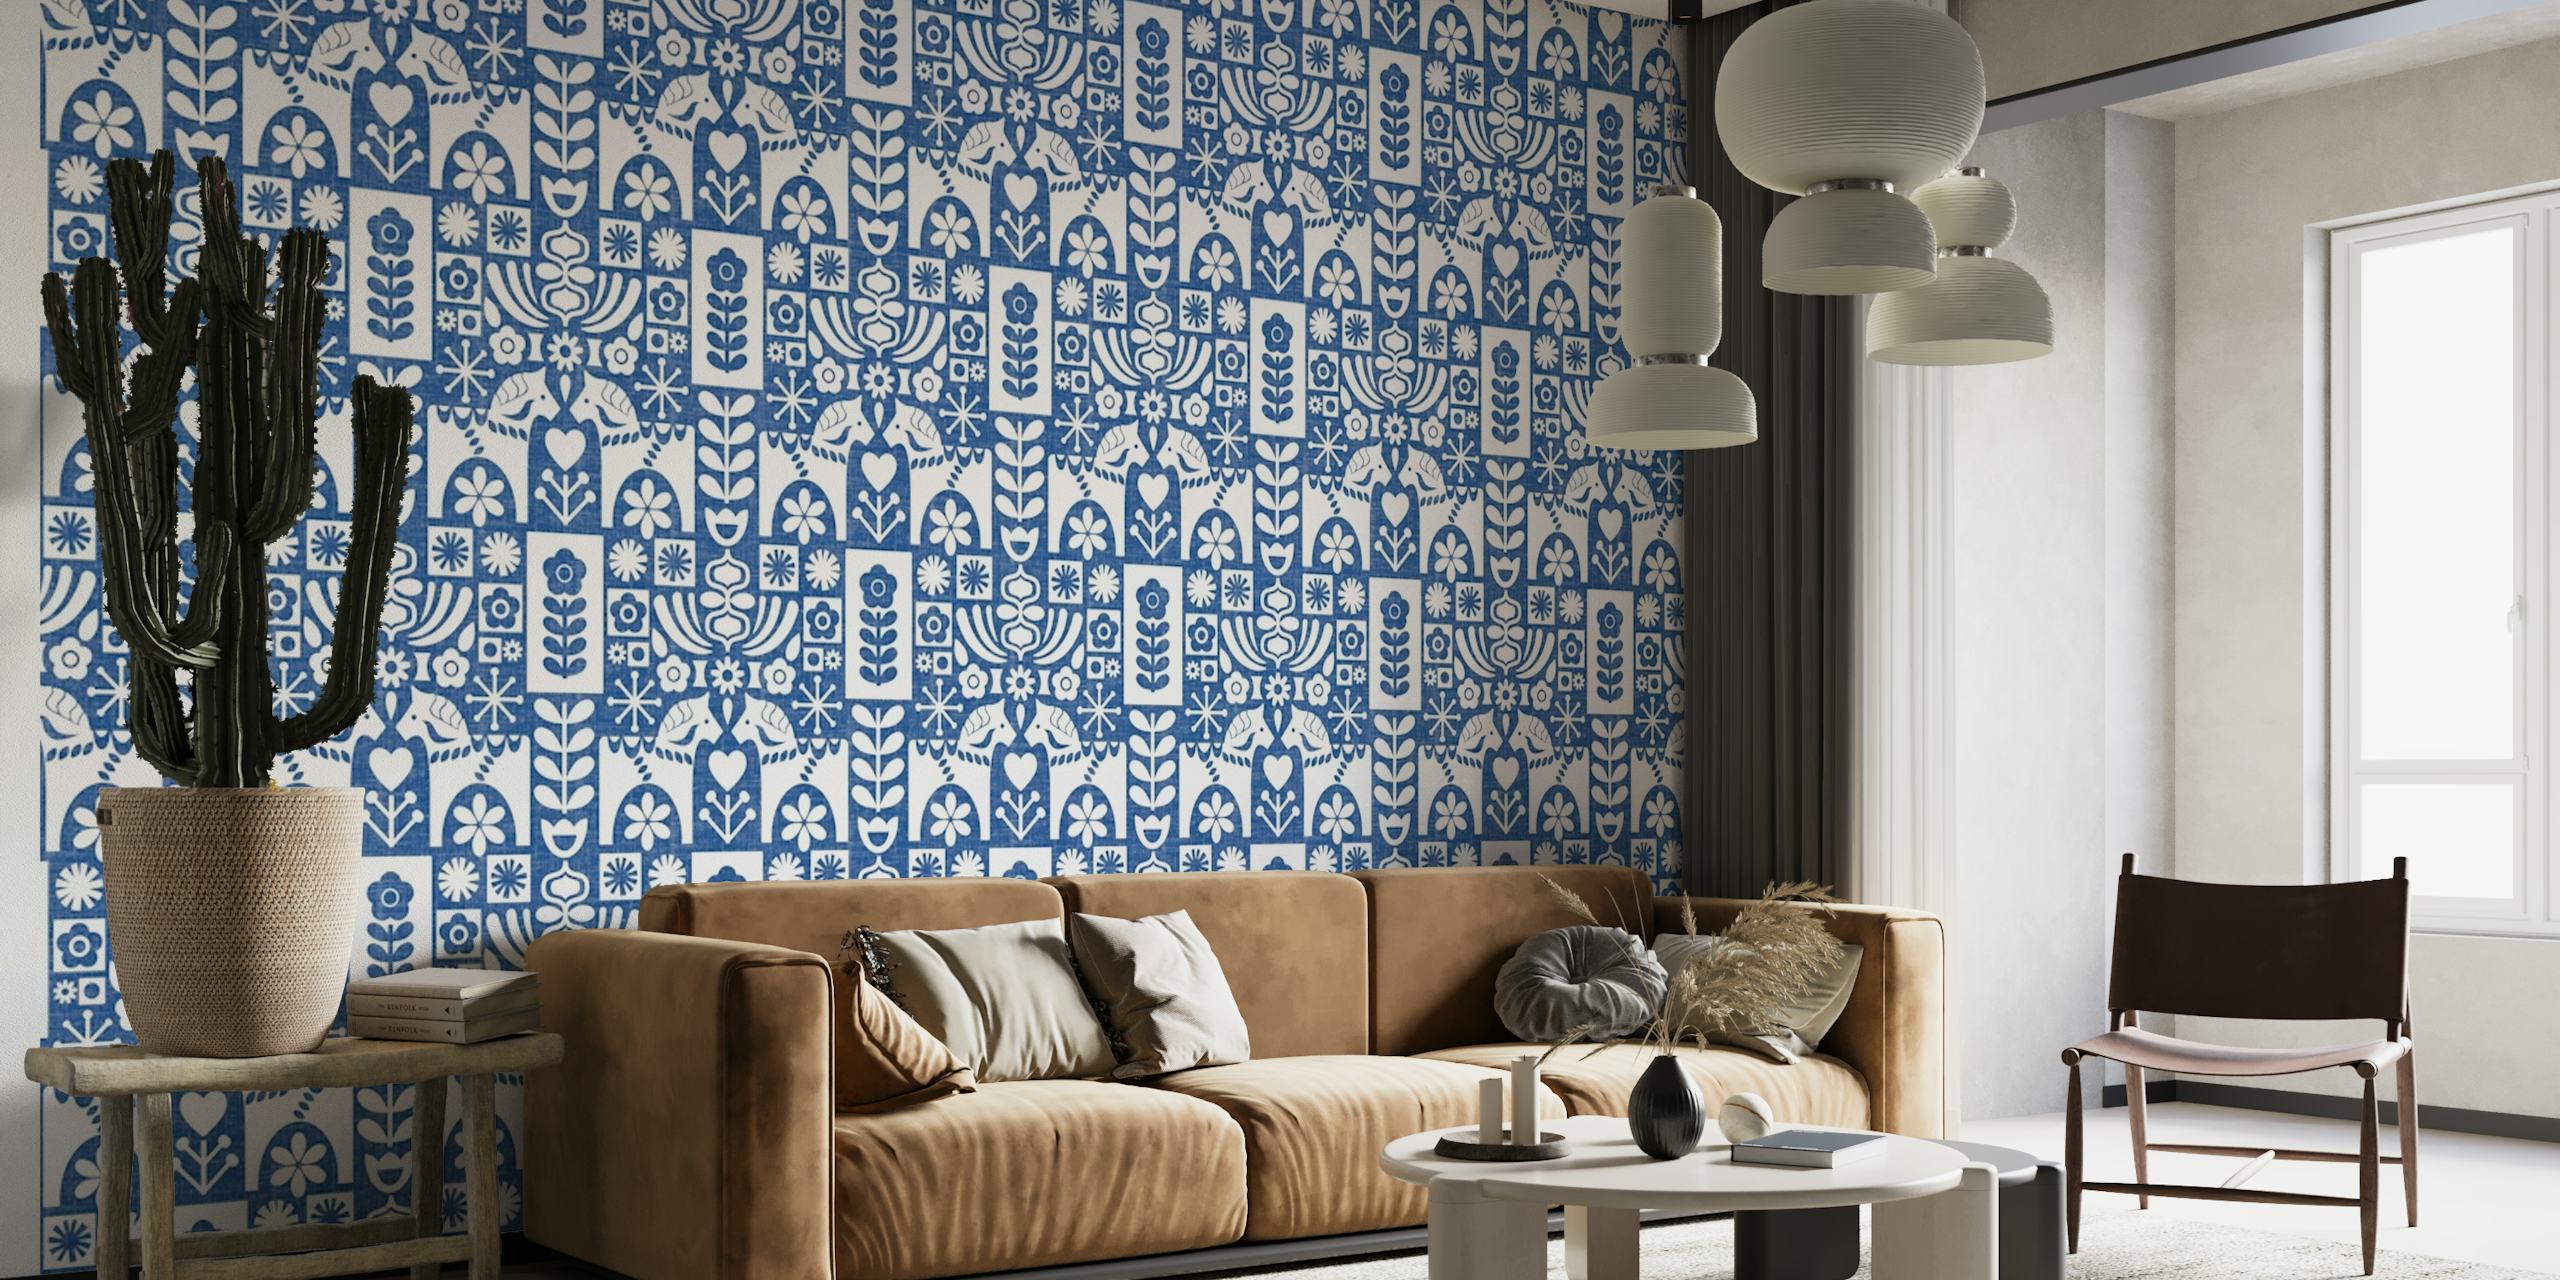 Swedish Folk Art Mid-Century Modern Blue Wall Mural with Floral and Geometric Patterns